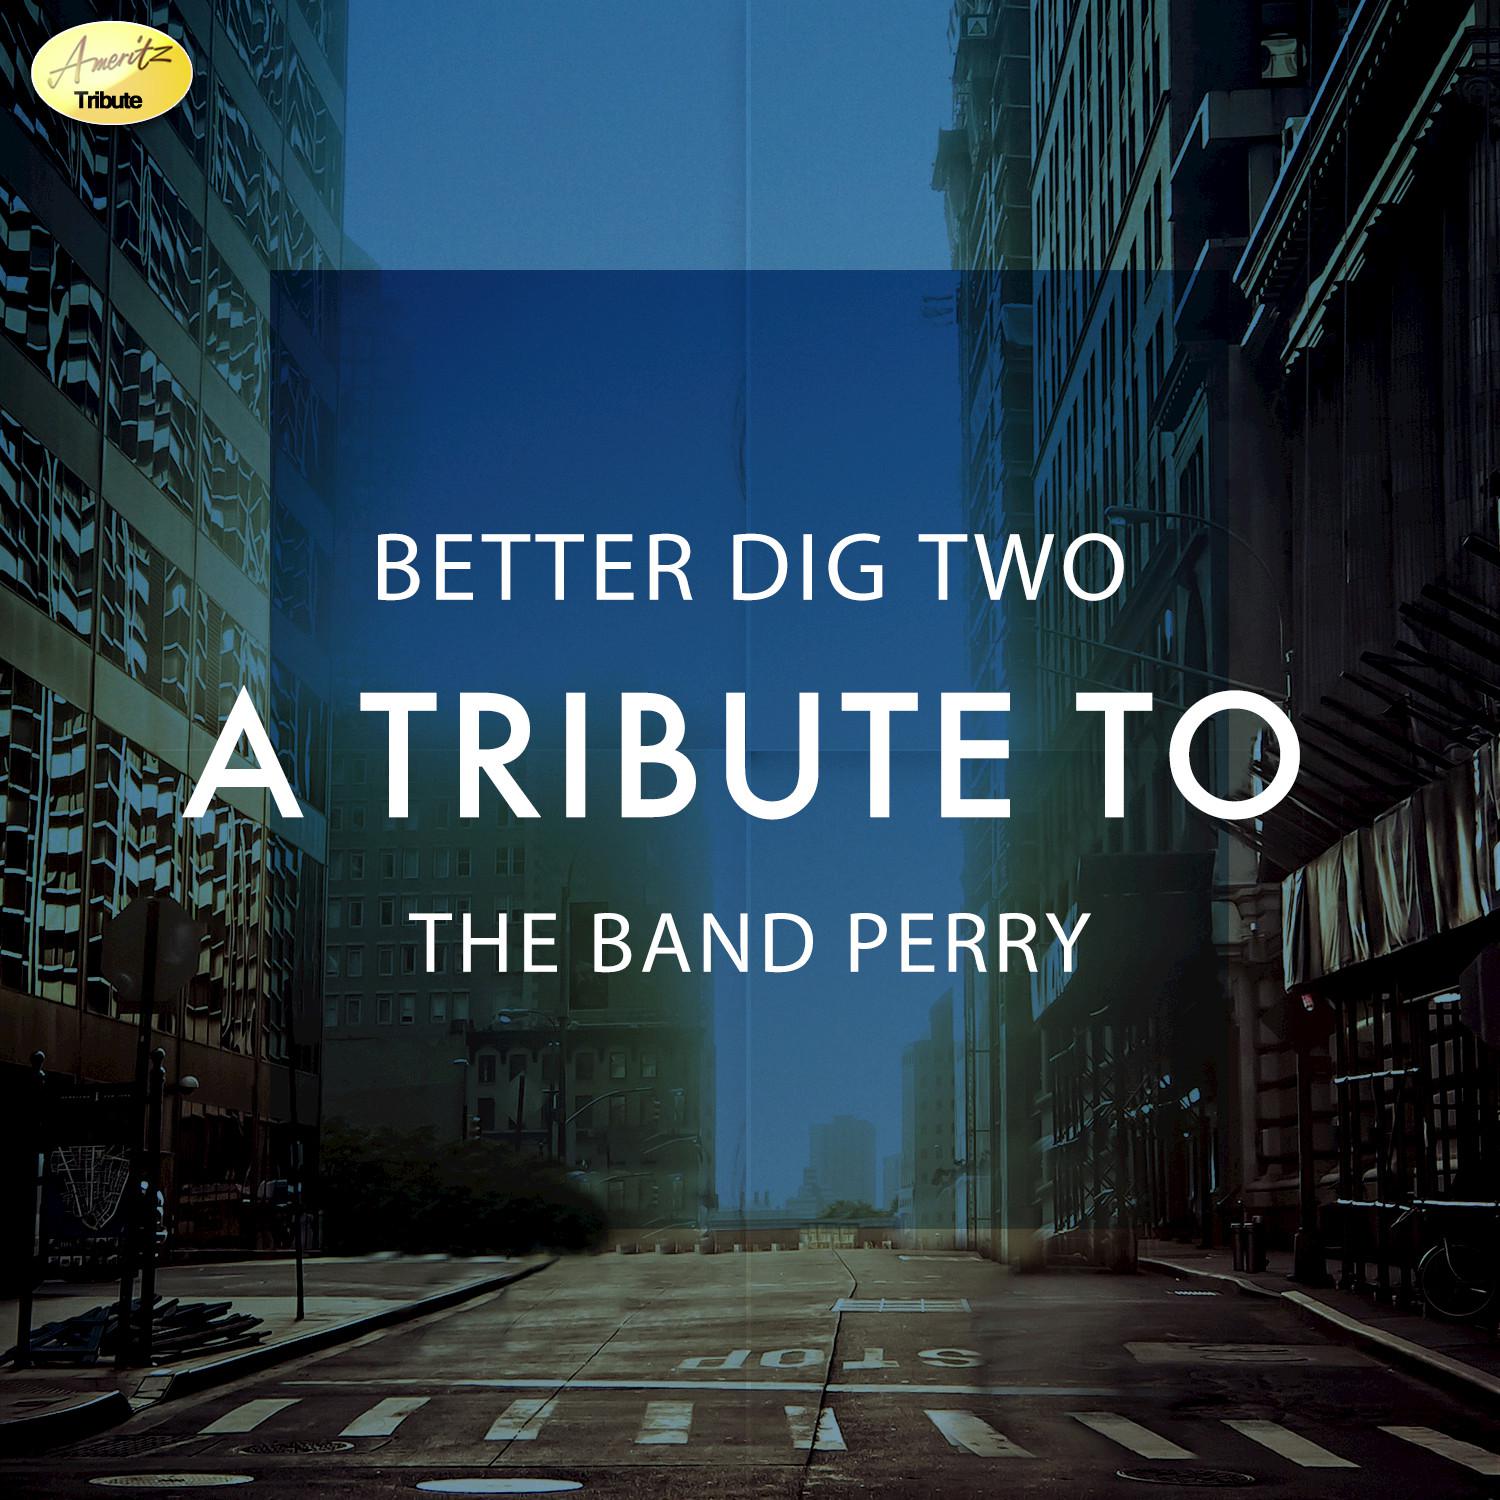 Better Dig Two - A Tribute to the Band Perry